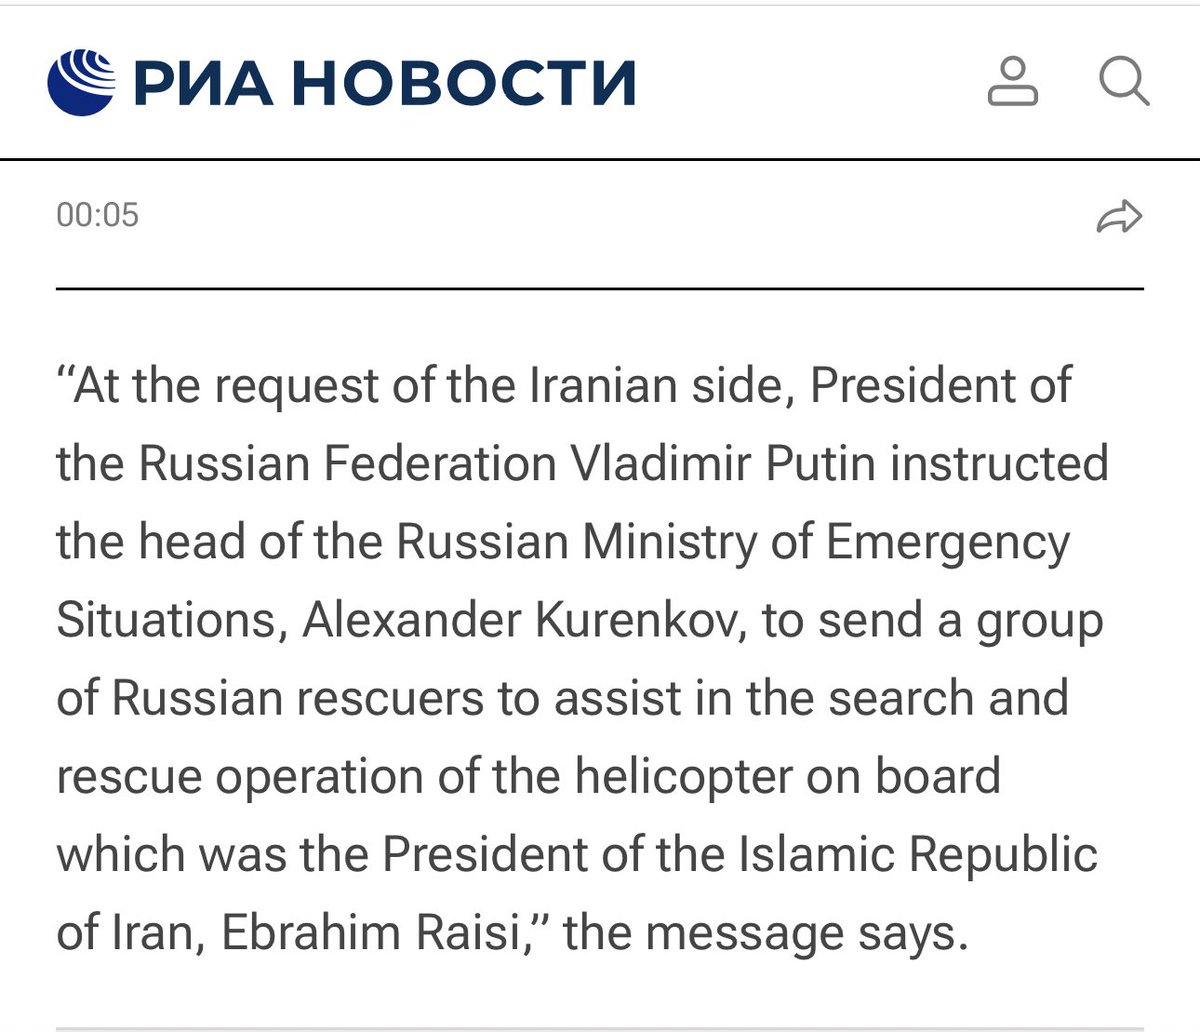 Russia to send rescuers to Iran. Of course they have to make it known that the request came from Iran